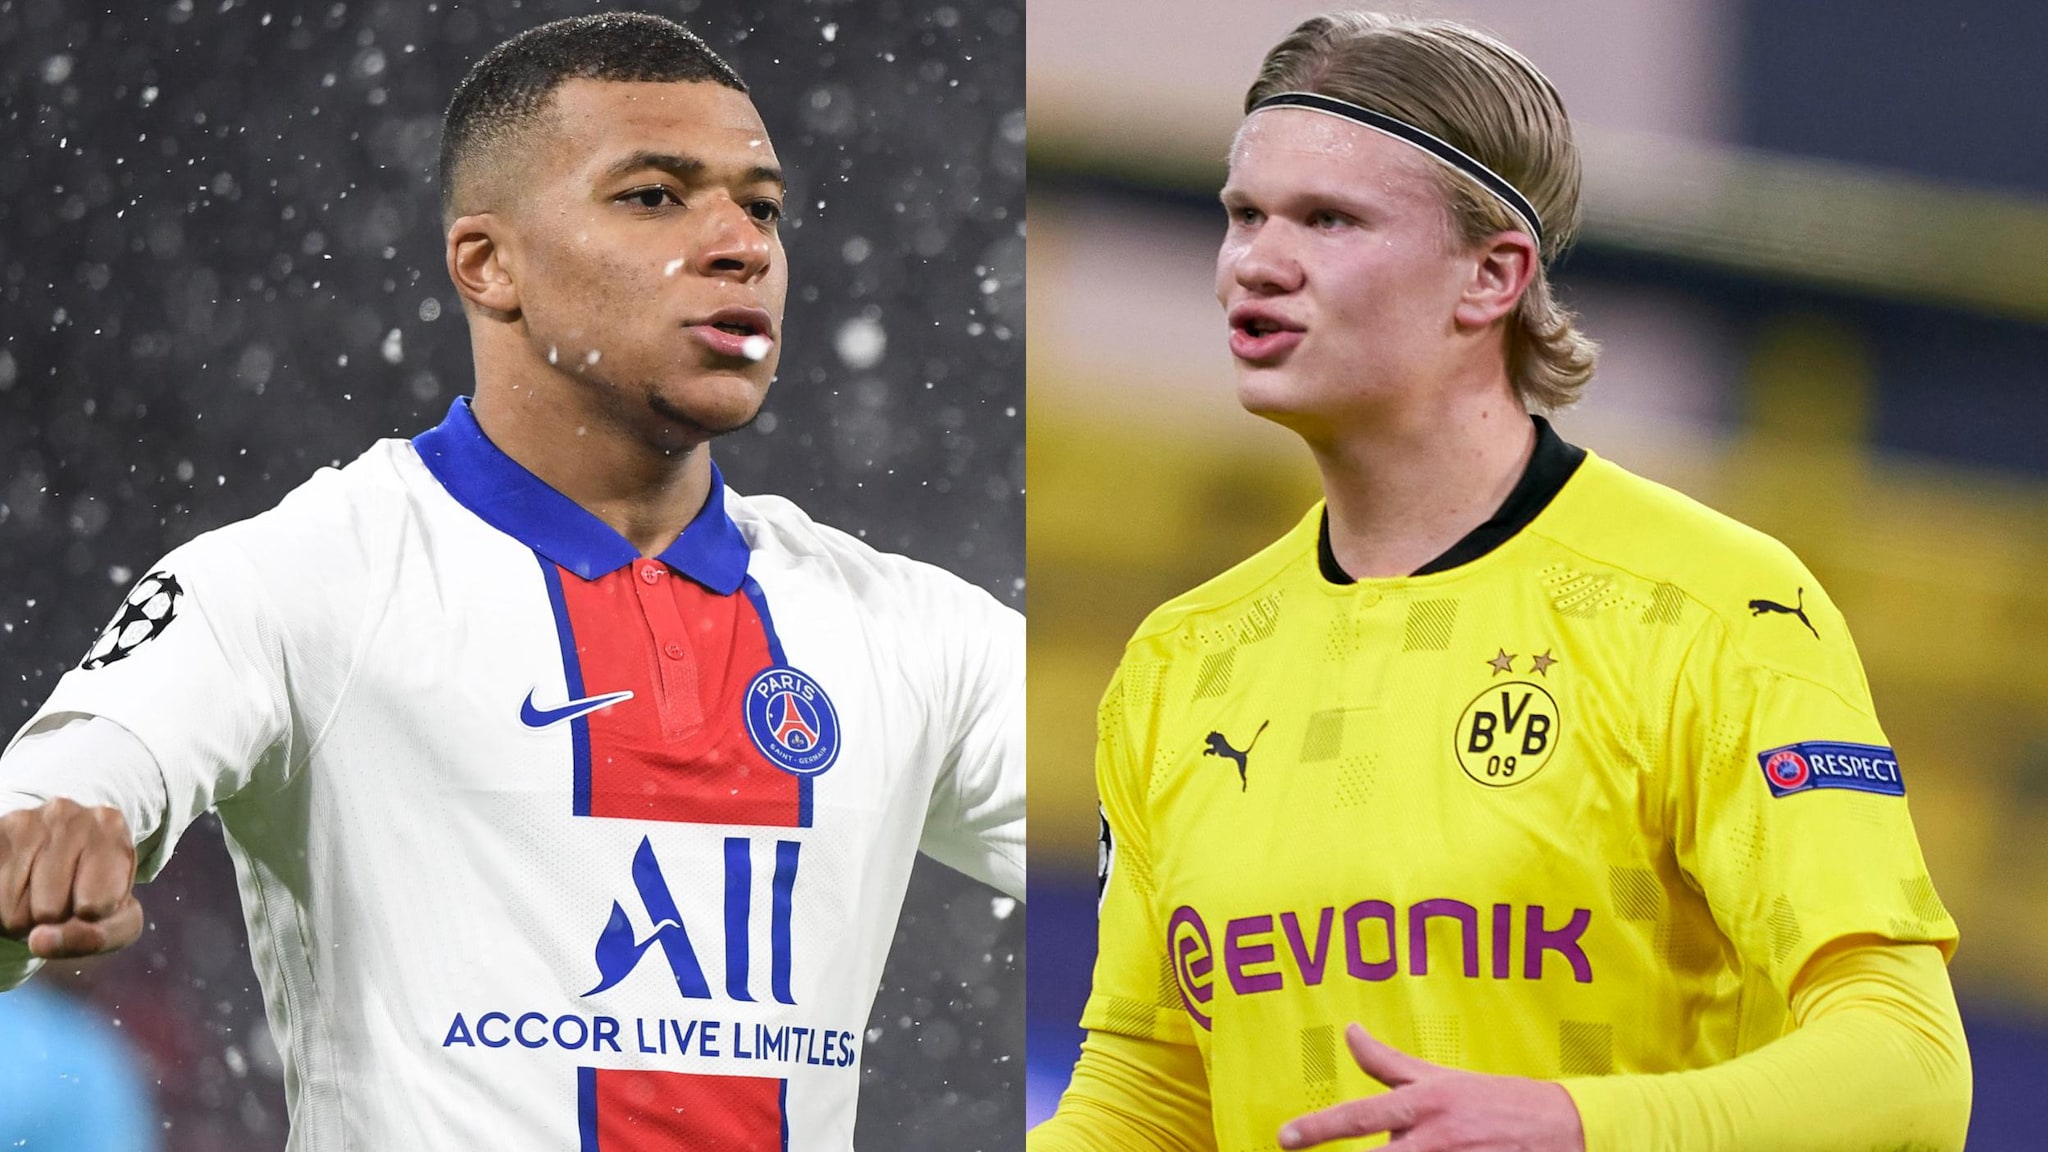 Just how good are Kylian Mbappé and Erling Haaland? | UEFA Champions League  | UEFA.com